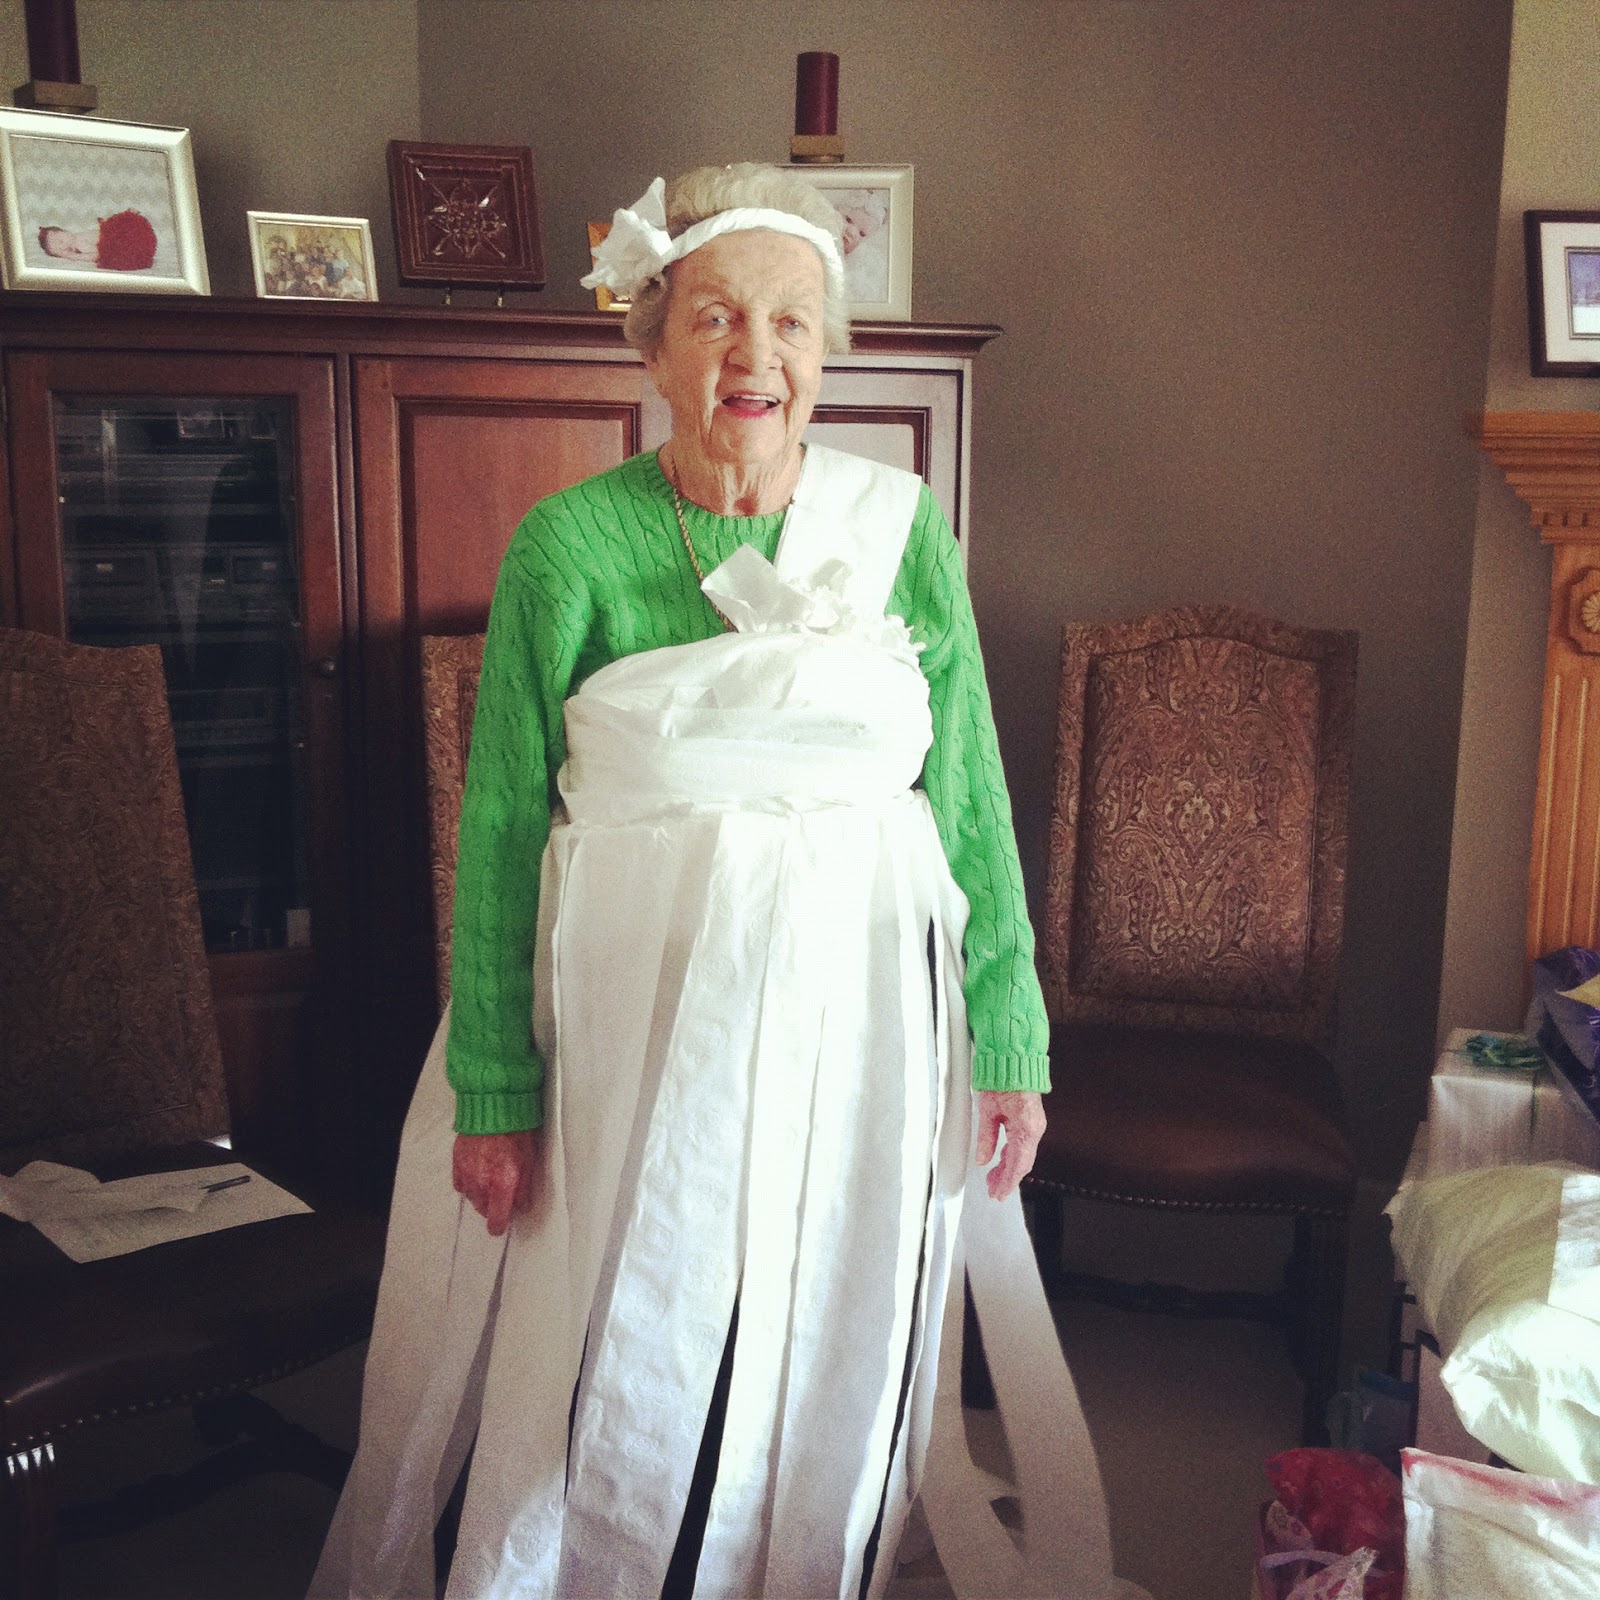 up Aunt Jean in a toilet paper wedding dress. She has been engaged